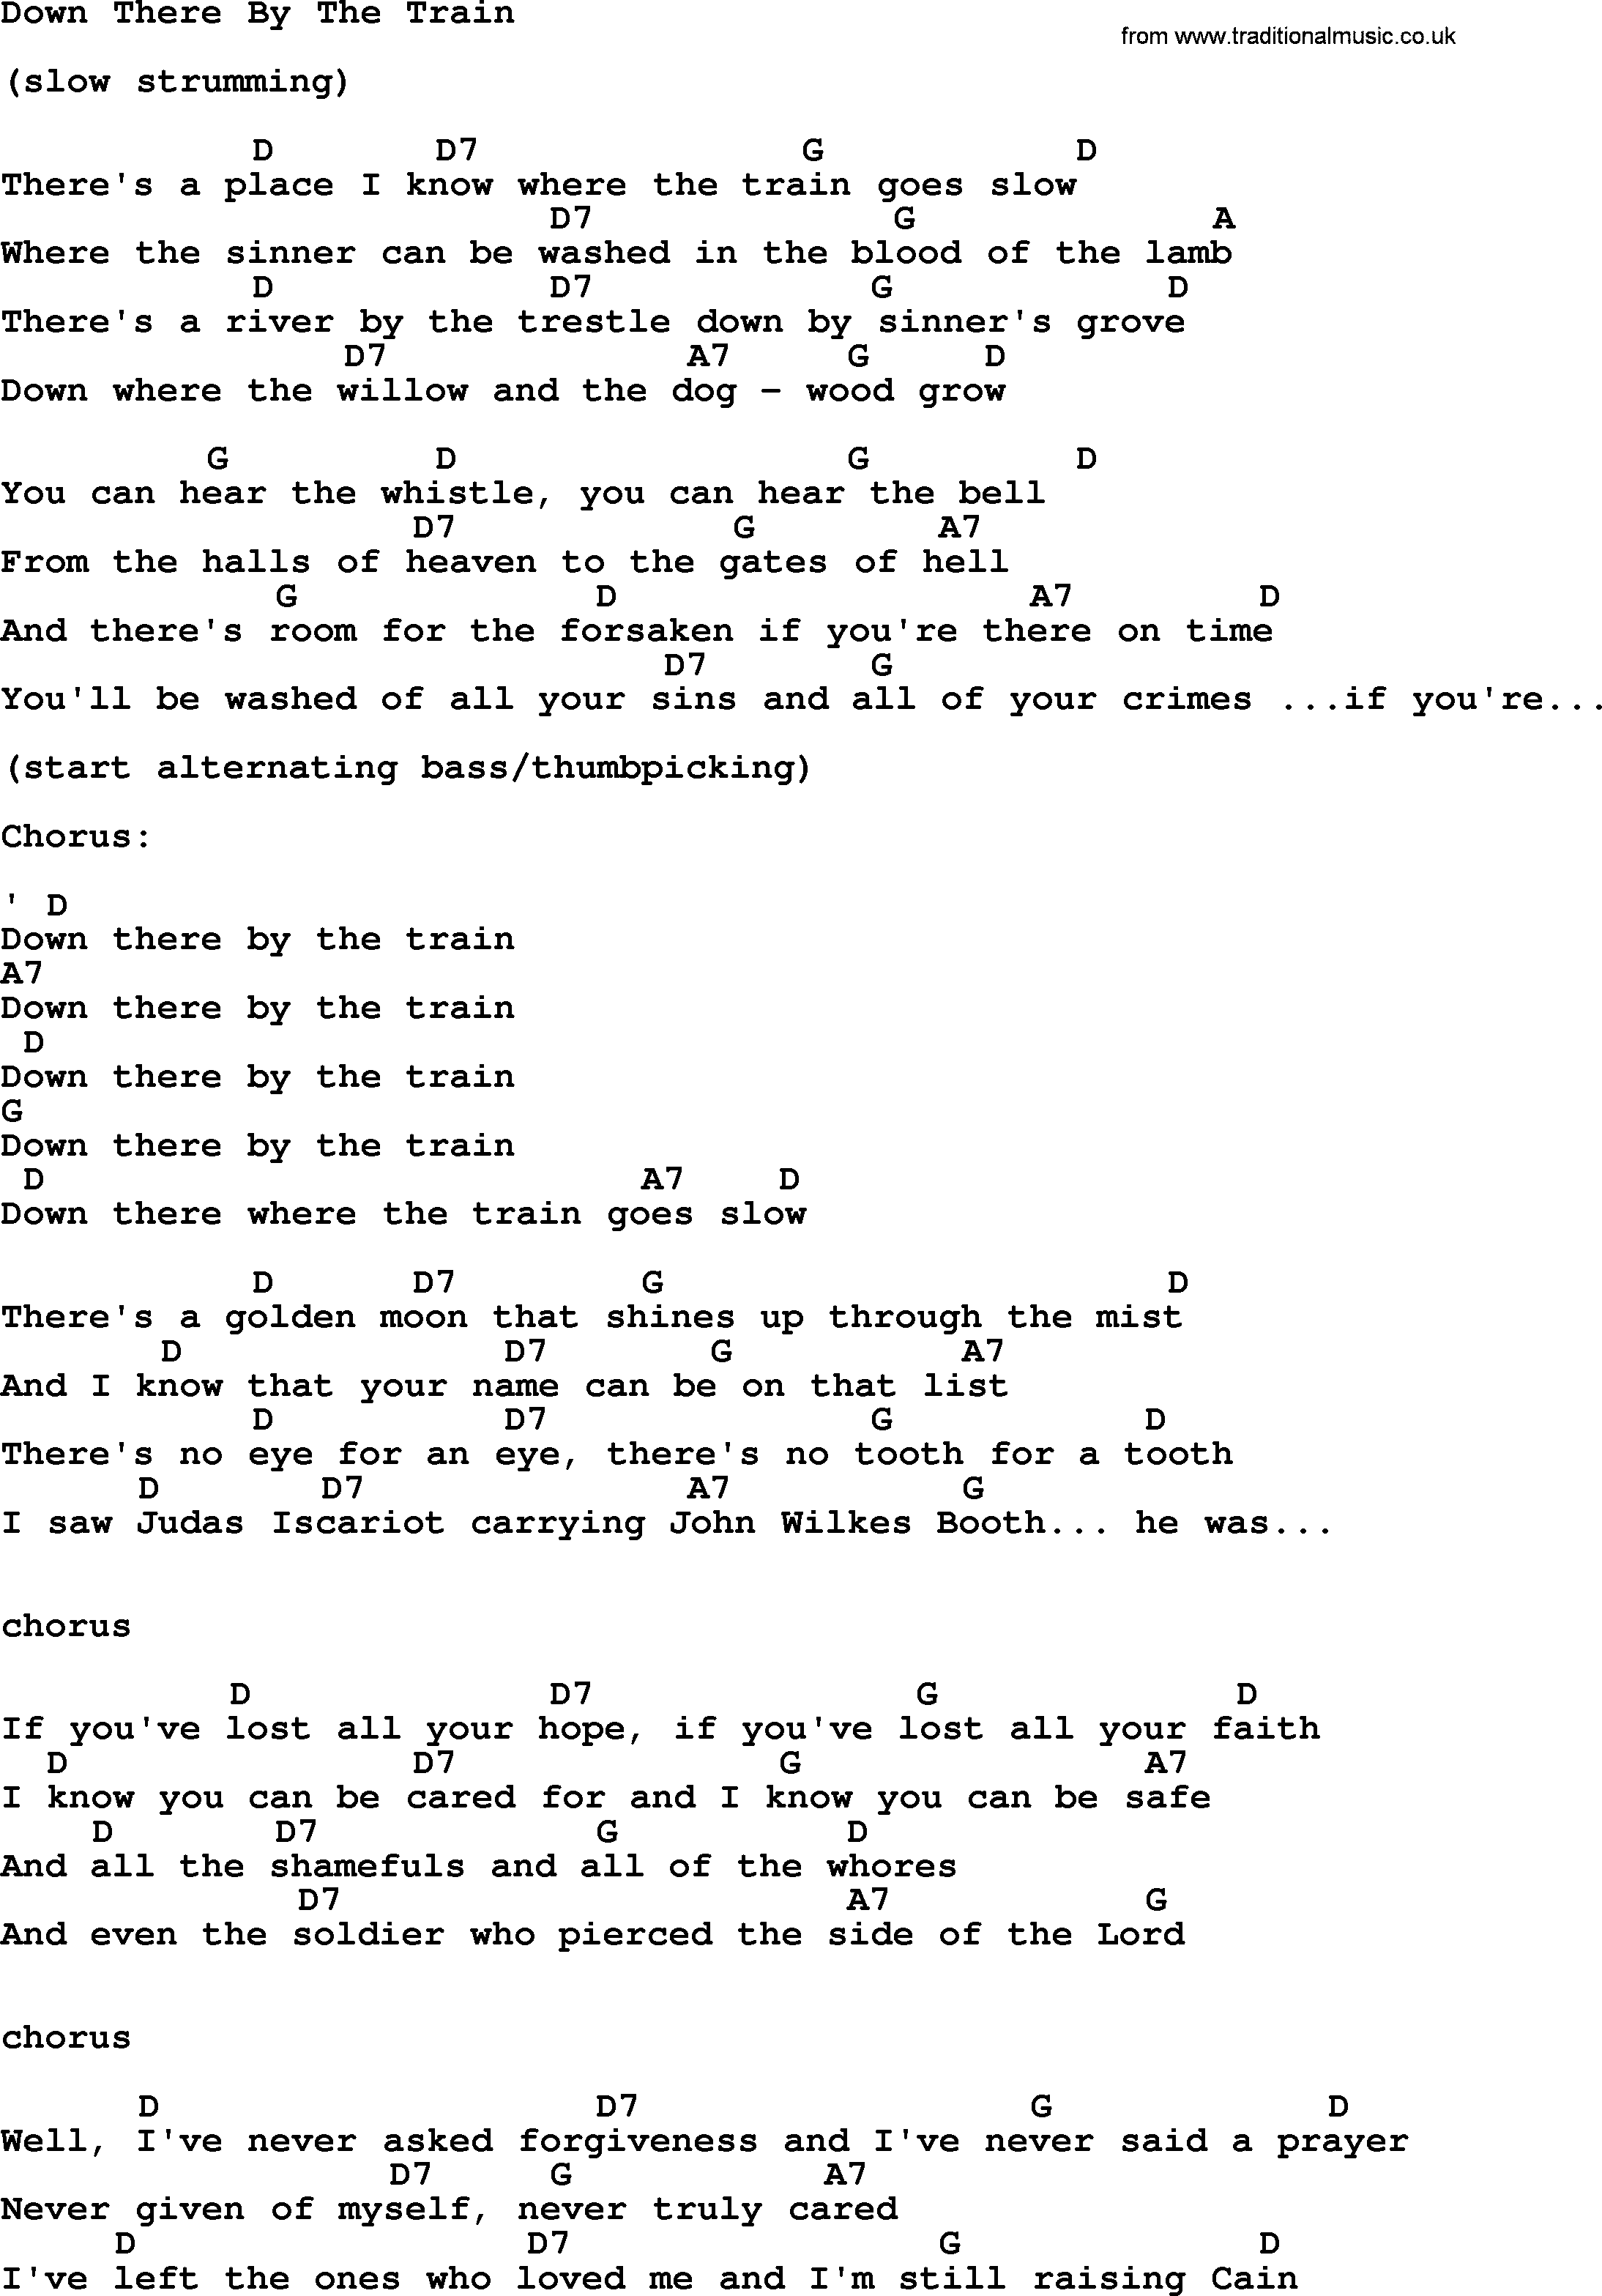 Johnny Cash song Down There By The Train, lyrics and chords